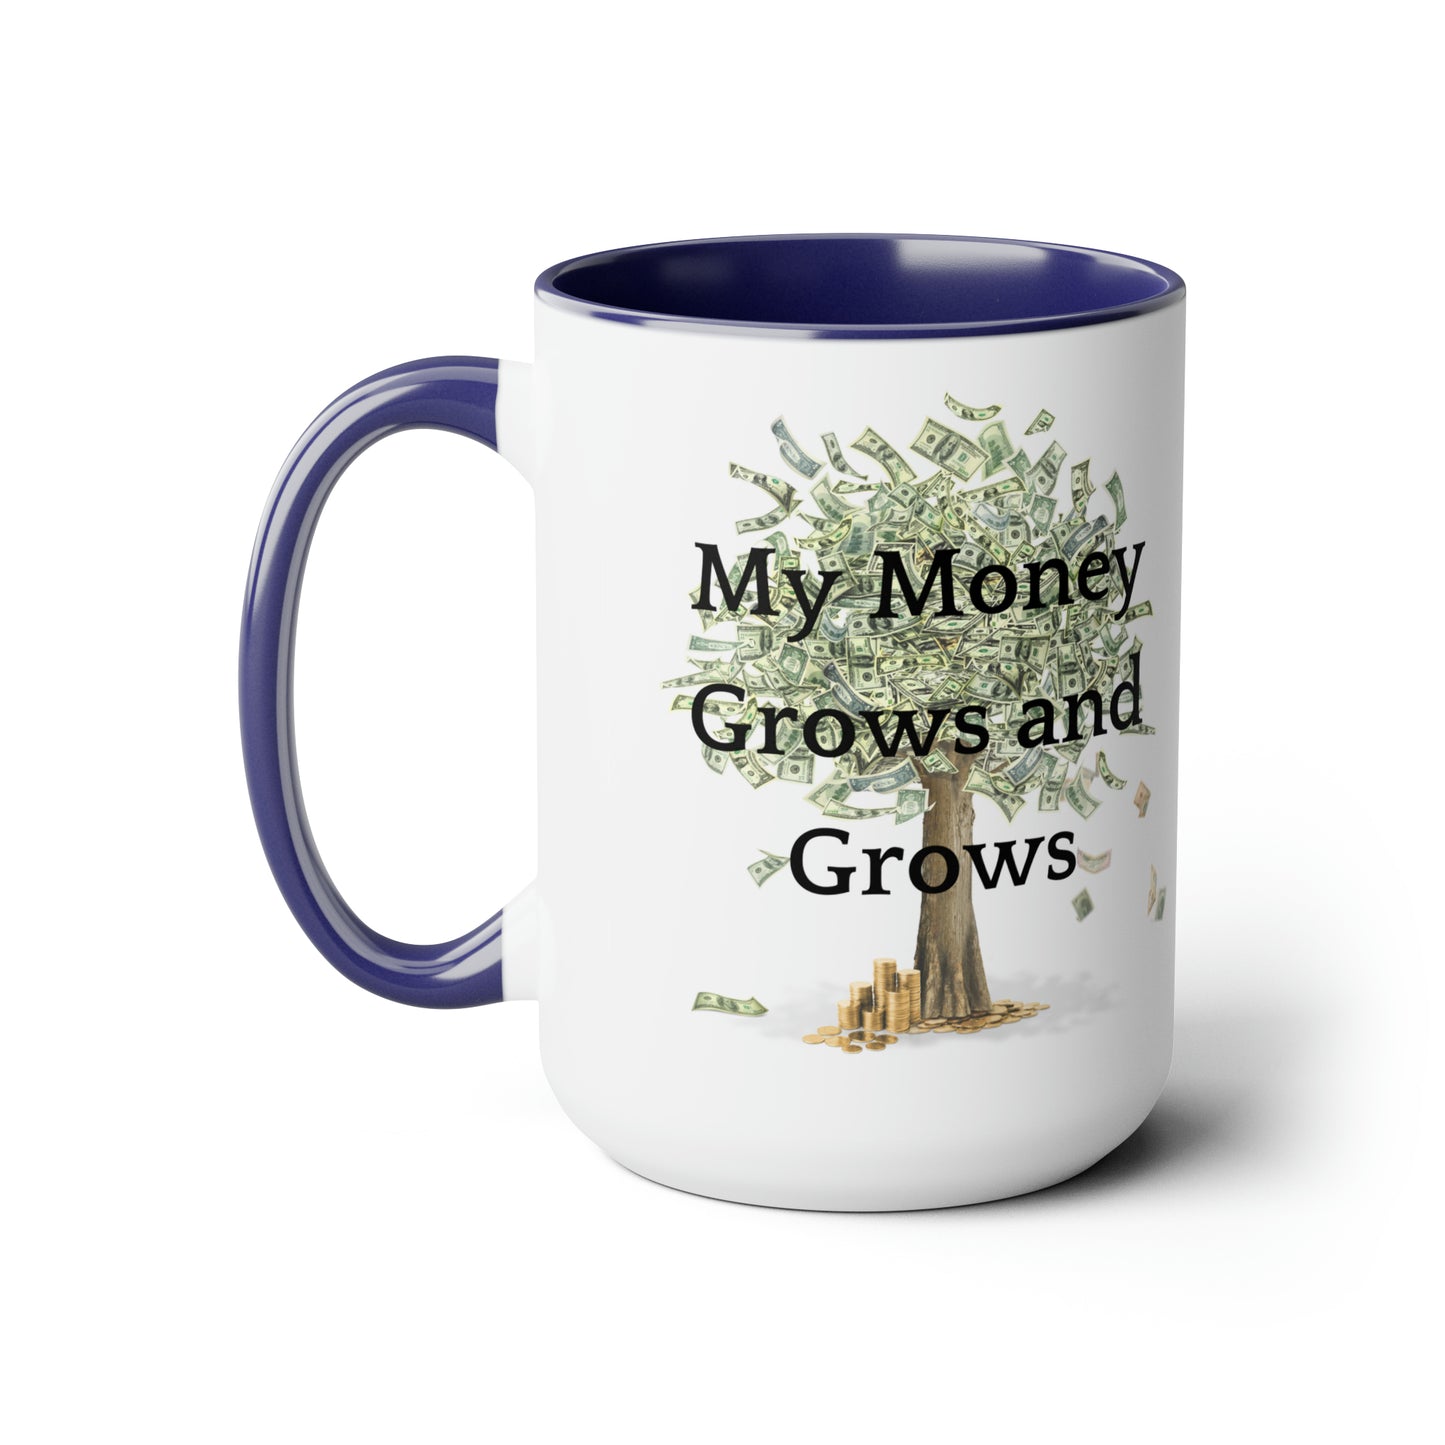 My Money Grows and Grows, Two-Tone Coffee Mugs, 15oz